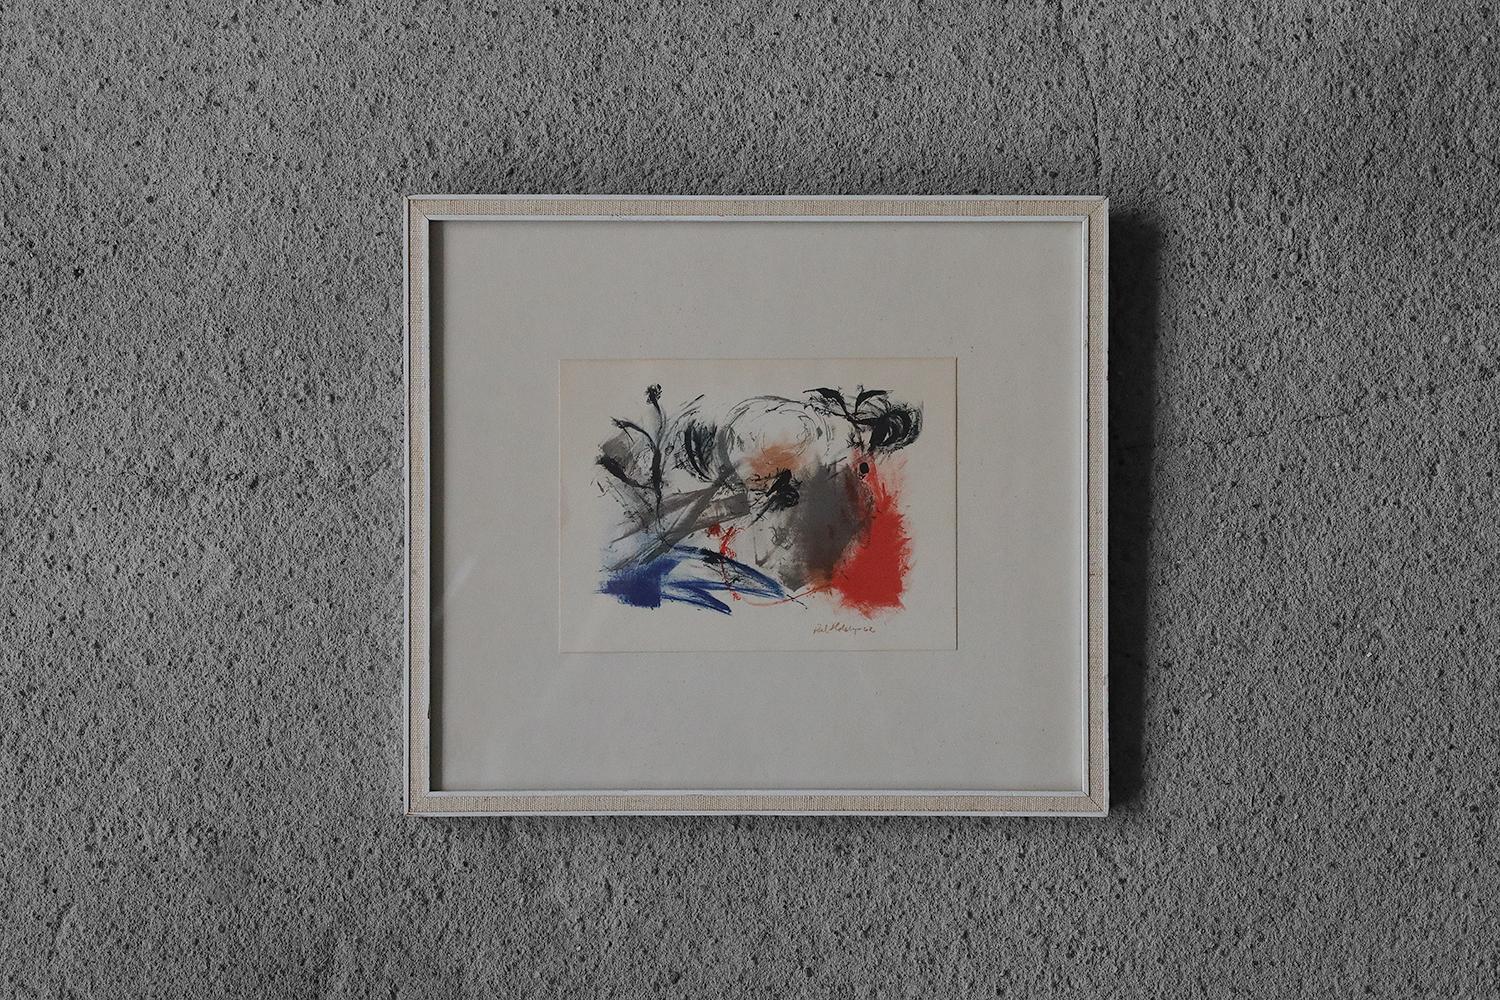 Scandinavian Modern Paul Holsby, Color Lithograph, 1962, Framed For Sale